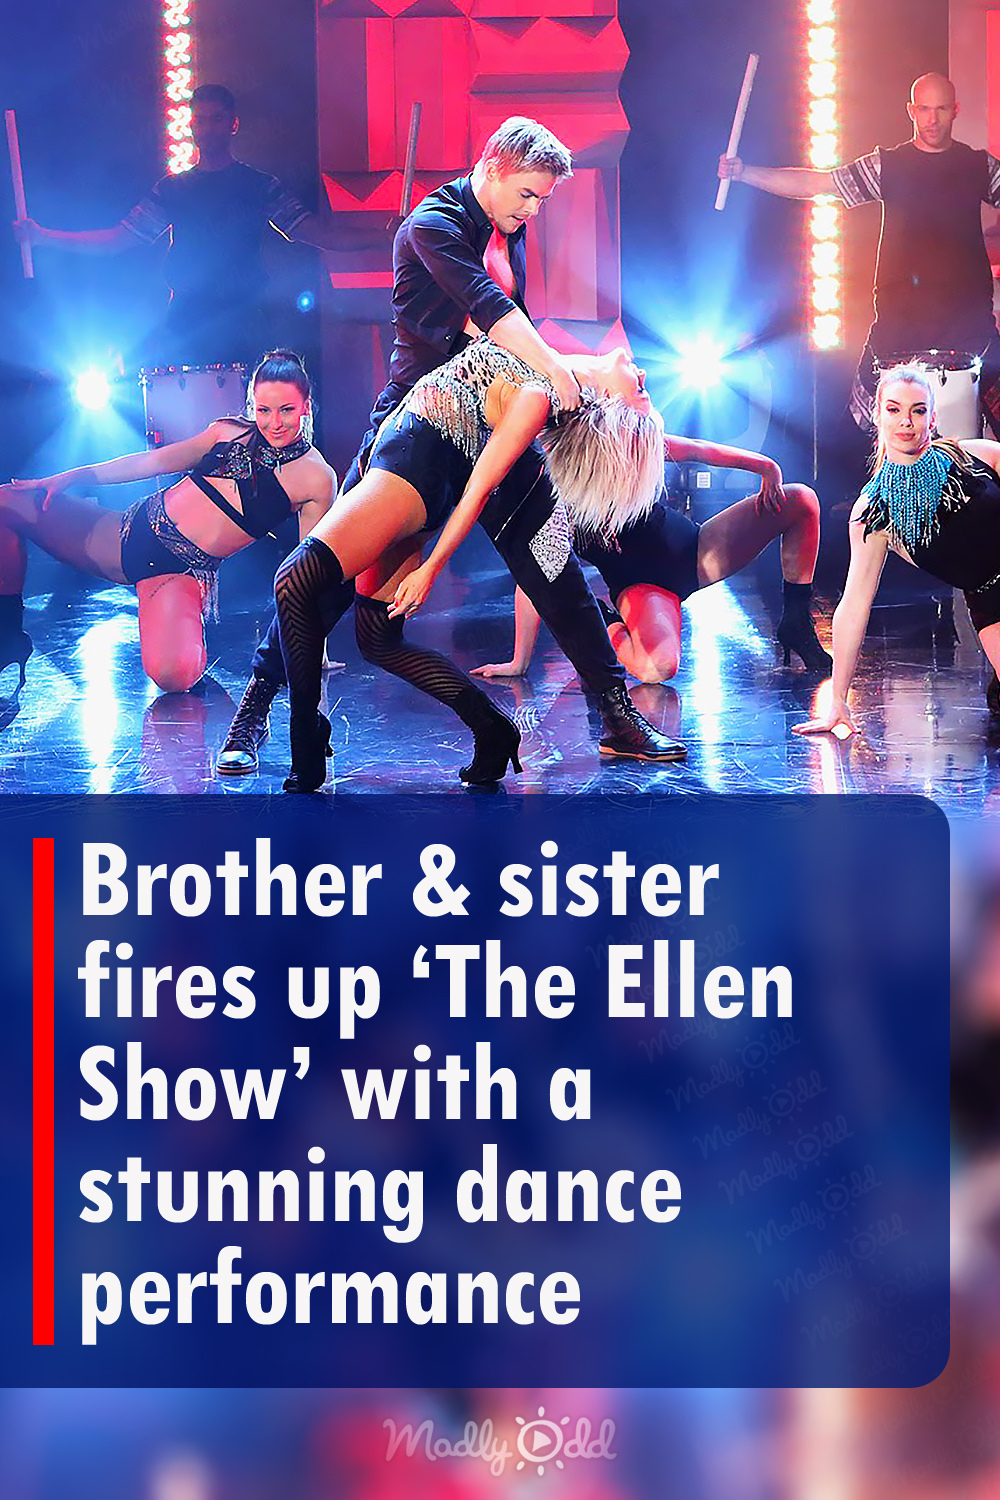 Brother & sister fires up ‘The Ellen Show’ with a stunning dance performance